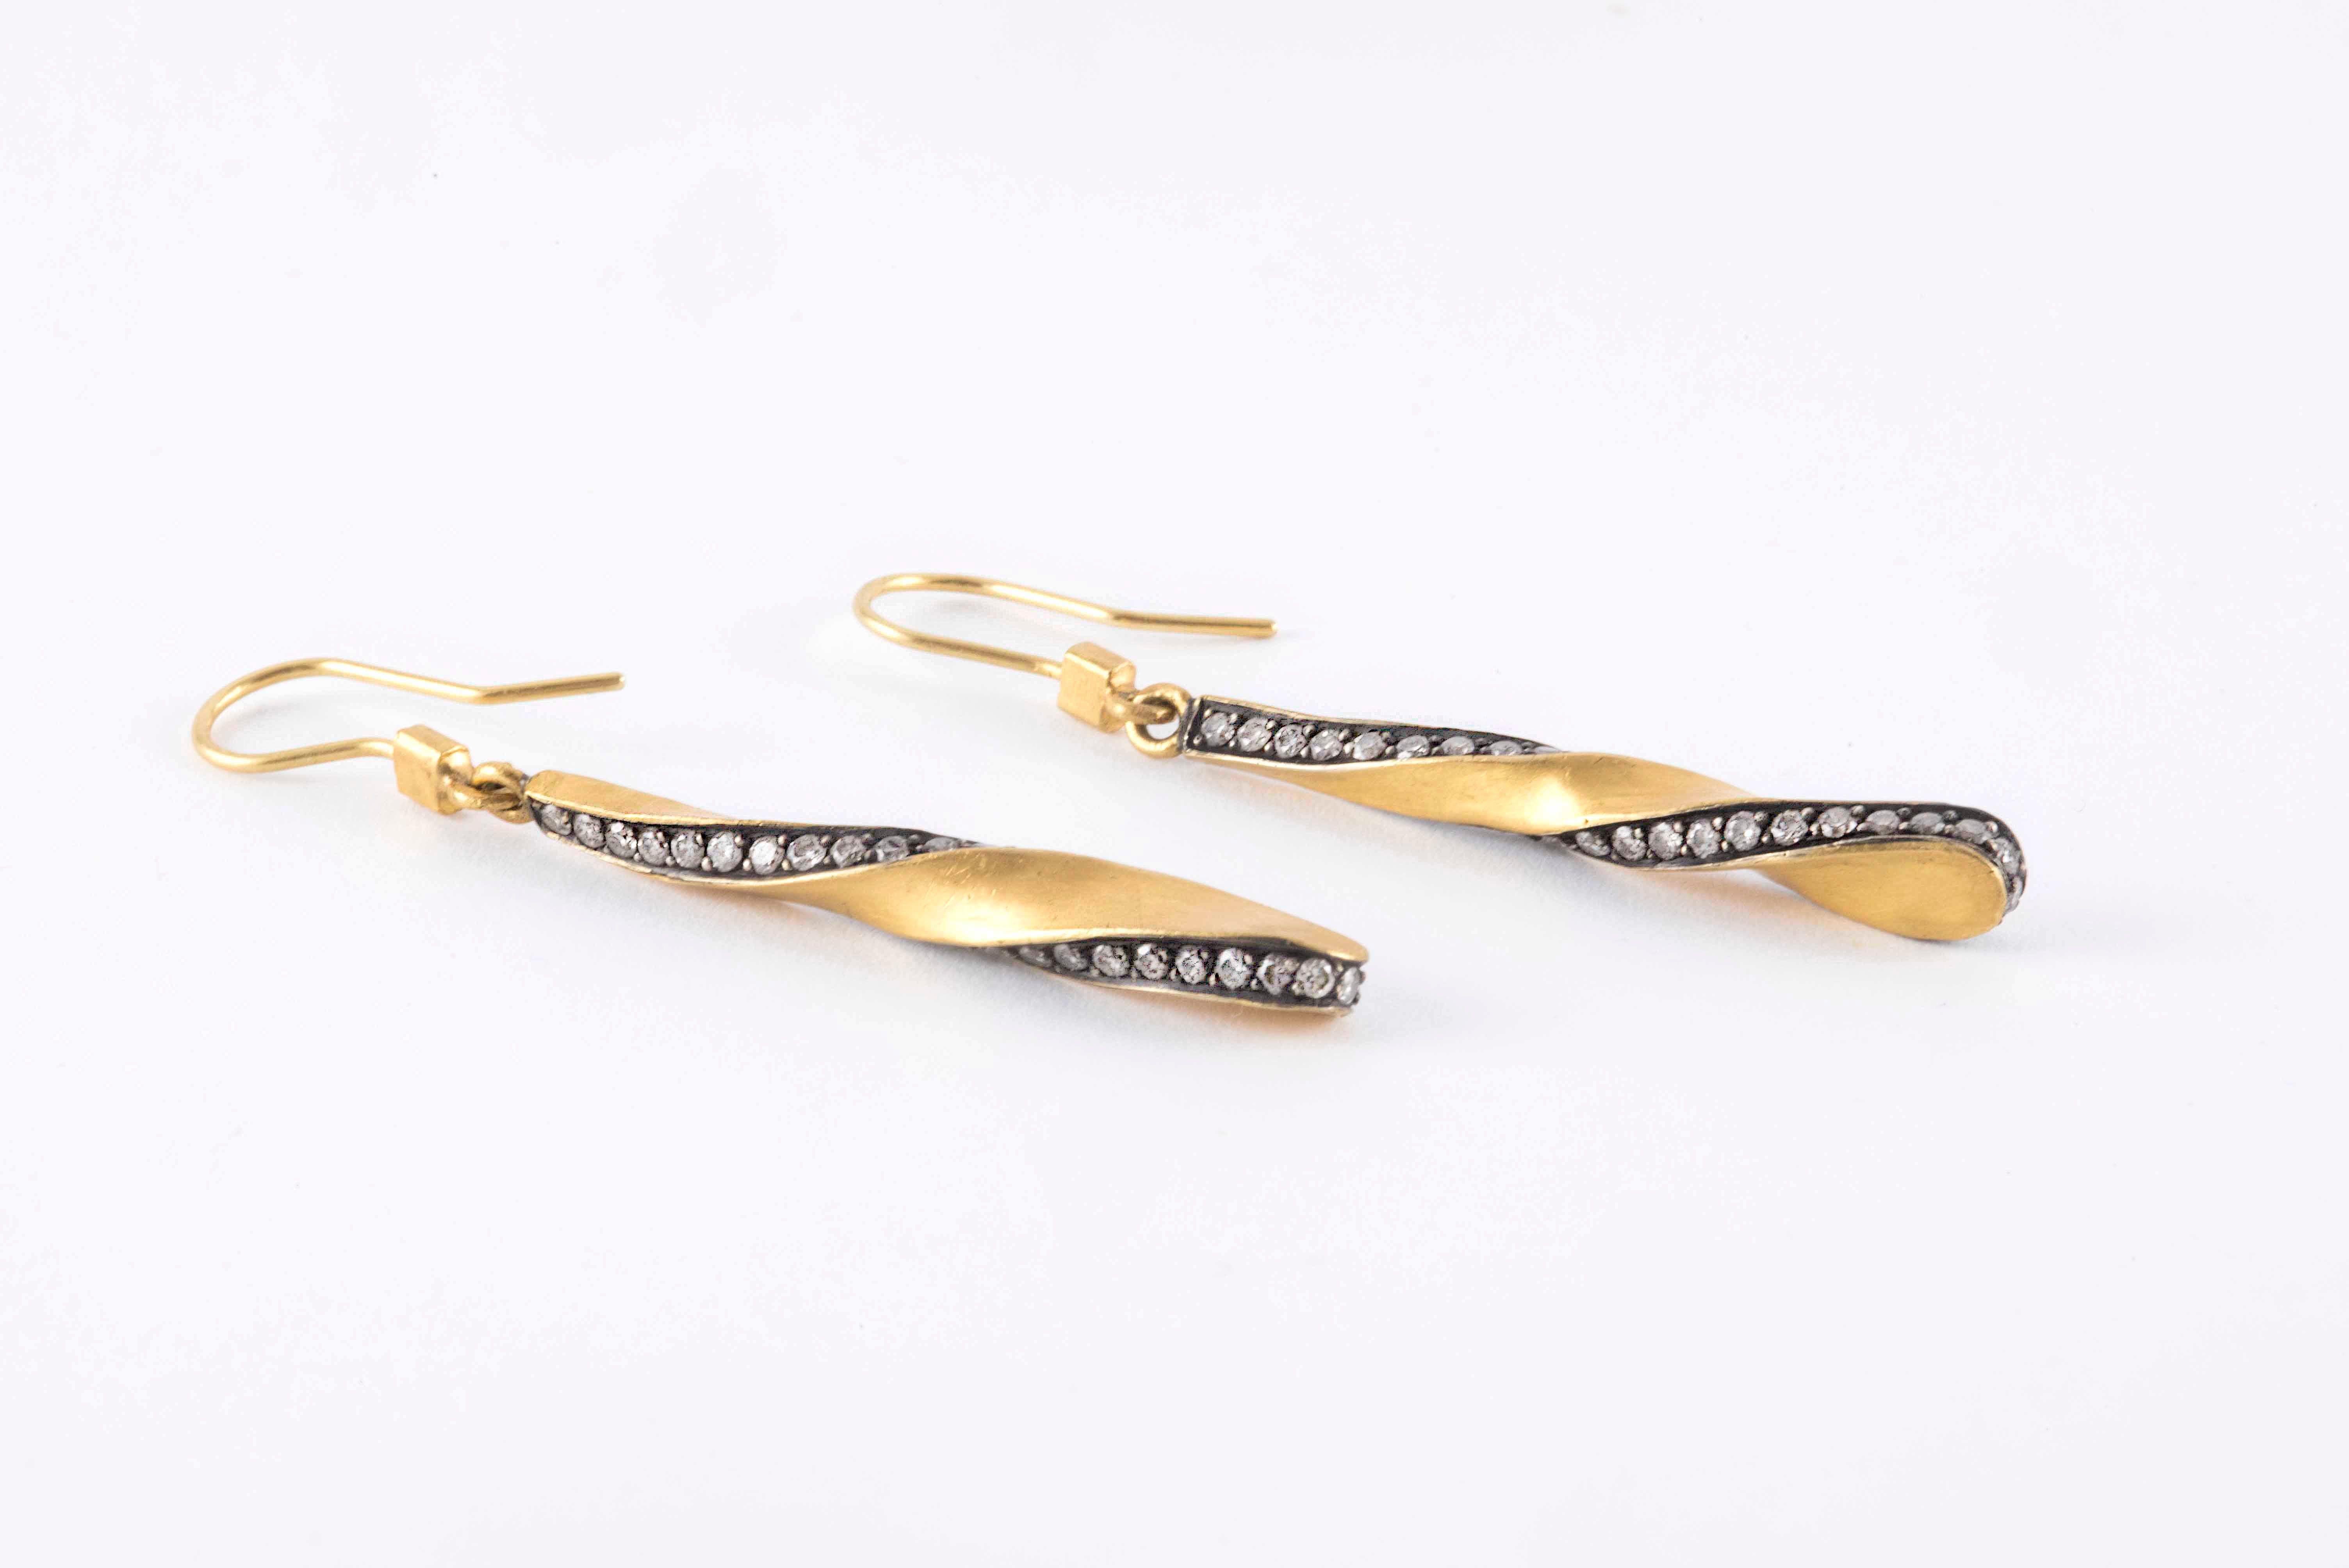 These dangle earrings handcrafted in 18kt yellow gold and darkened gold in a spiral design feature eighty-four round diamonds totaling approximately 1.20 carats. The earrings measure about two inches long. 
